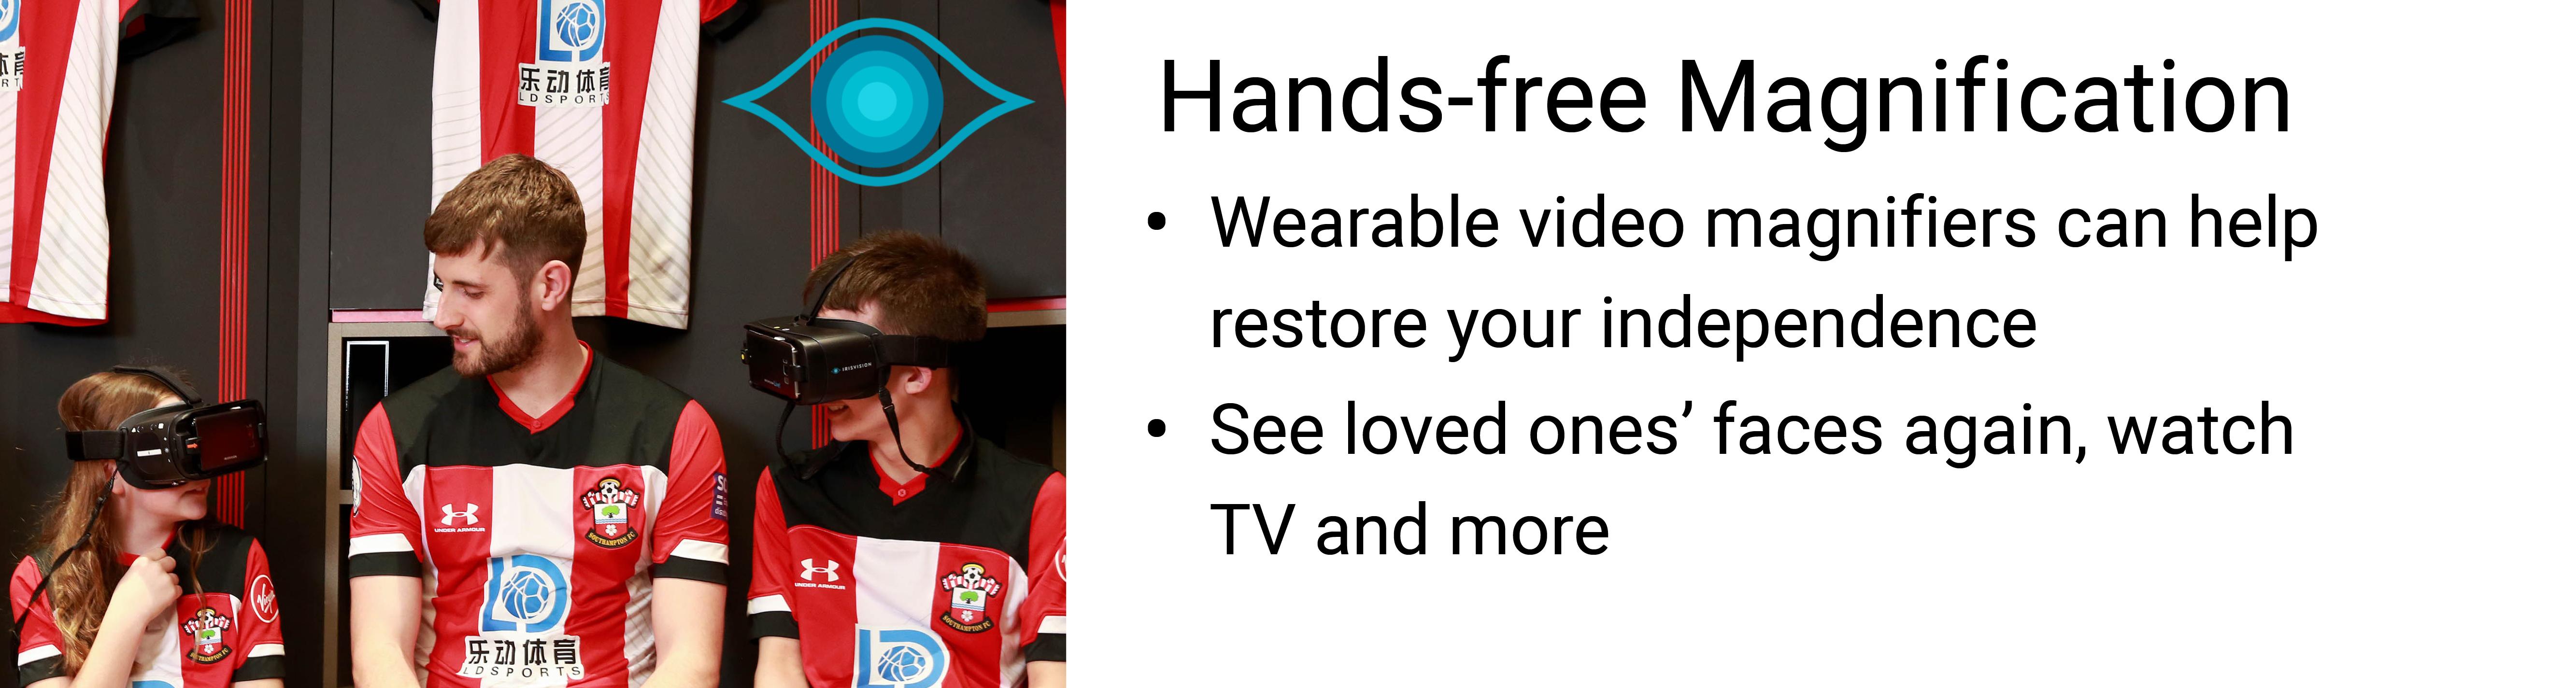 Wearable video magnifiers can help to restore your independence. Use it to see your loved ones' faces again, watch TV and more. Click here for more information.